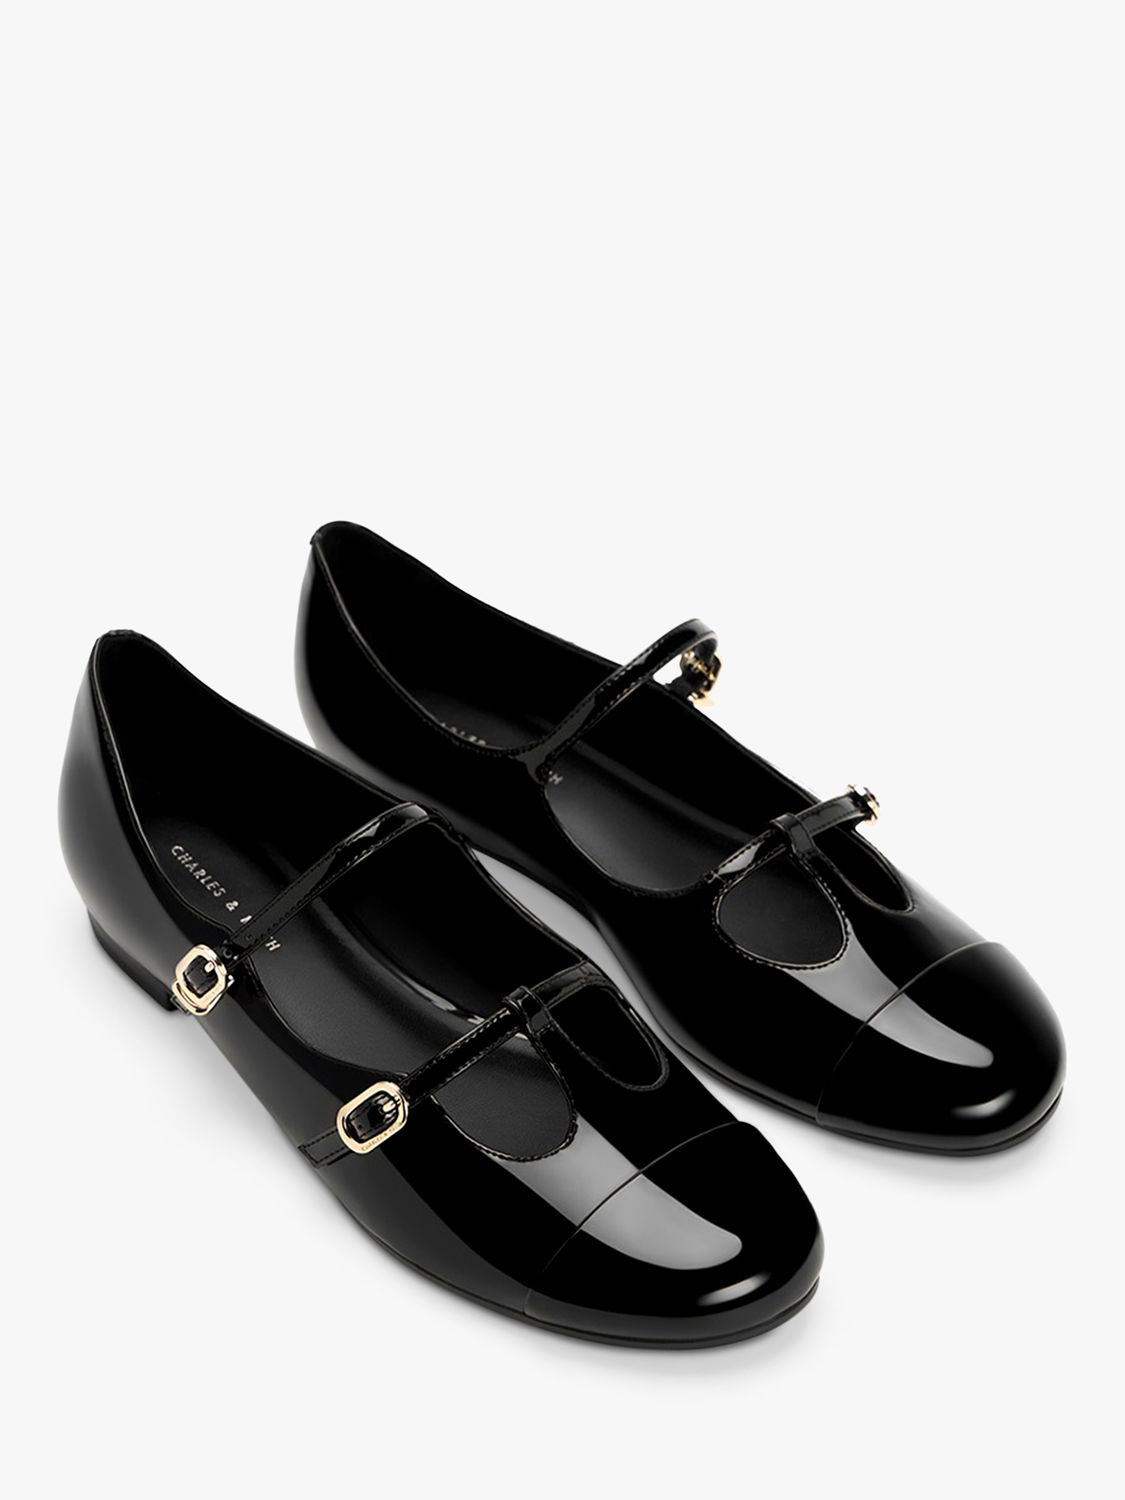 CHARLES & KEITH Double Strap Mary Janes, Black Box, 6